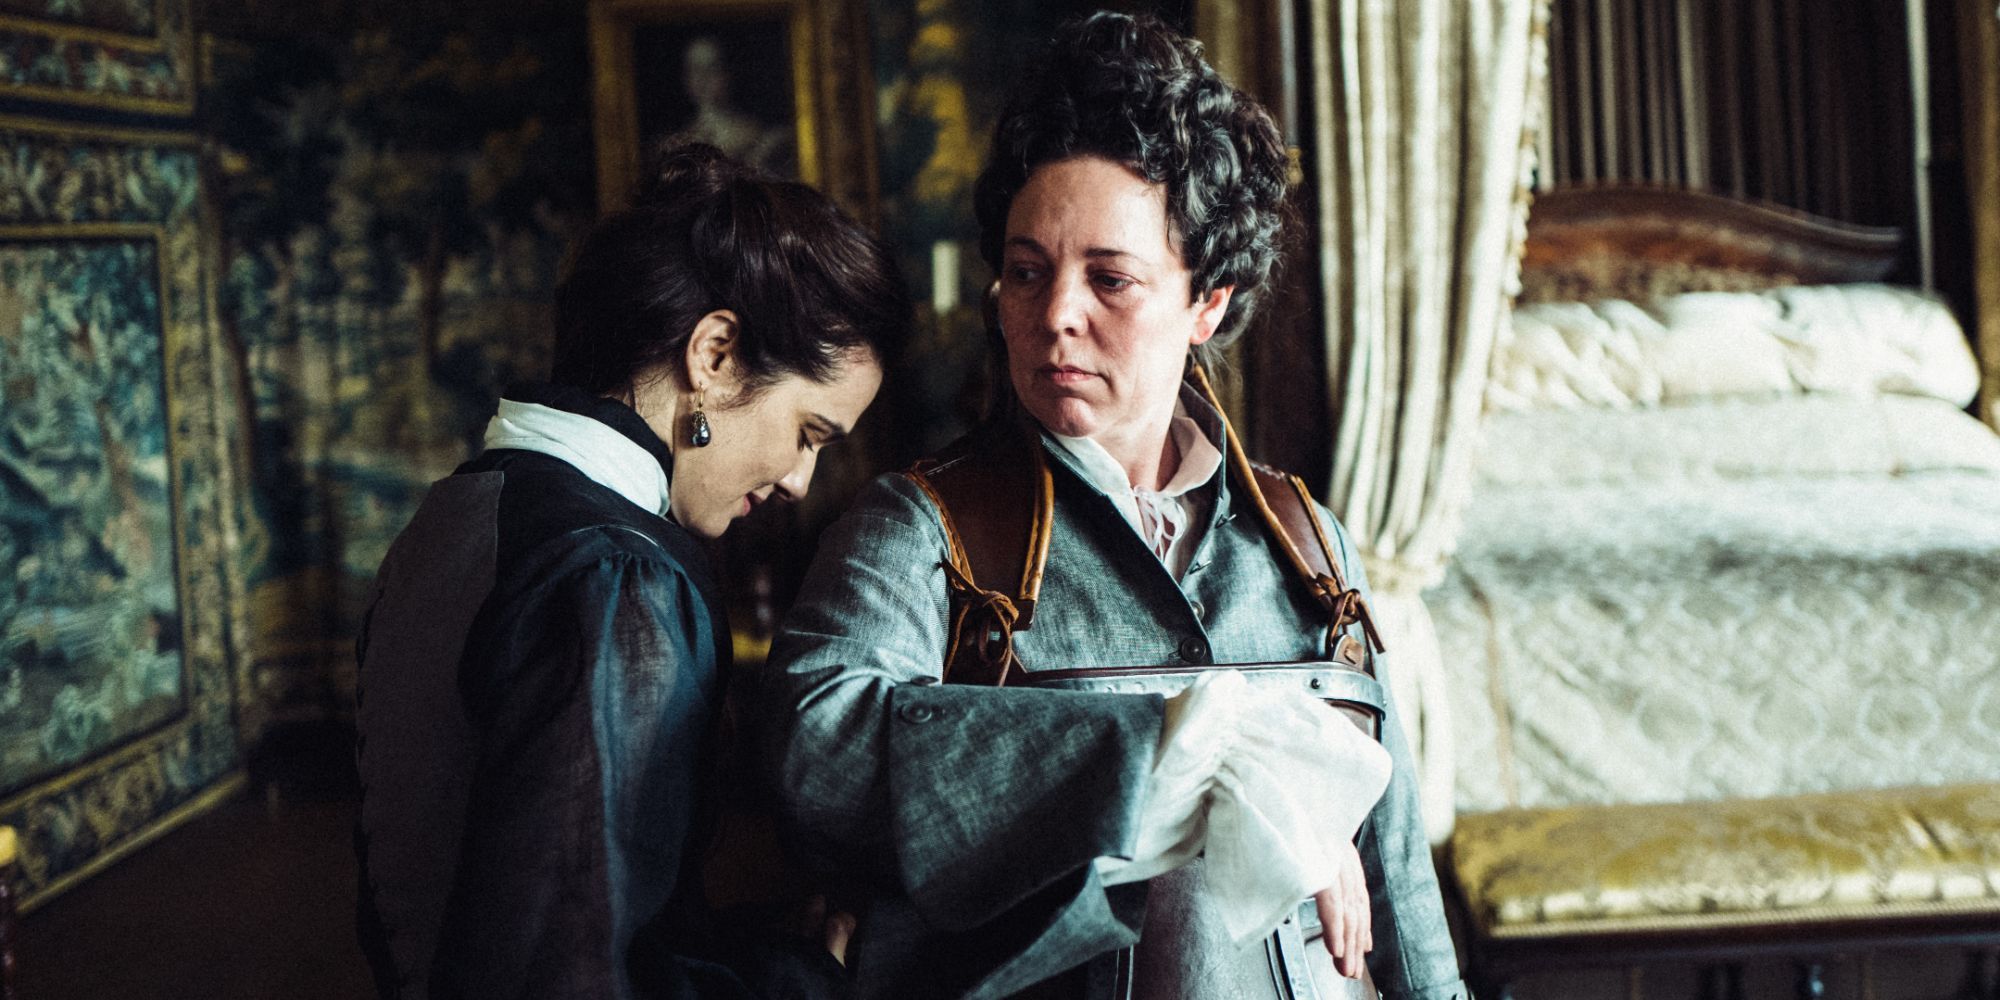 Rachel Weisz and Olivia Colman in The Favourite